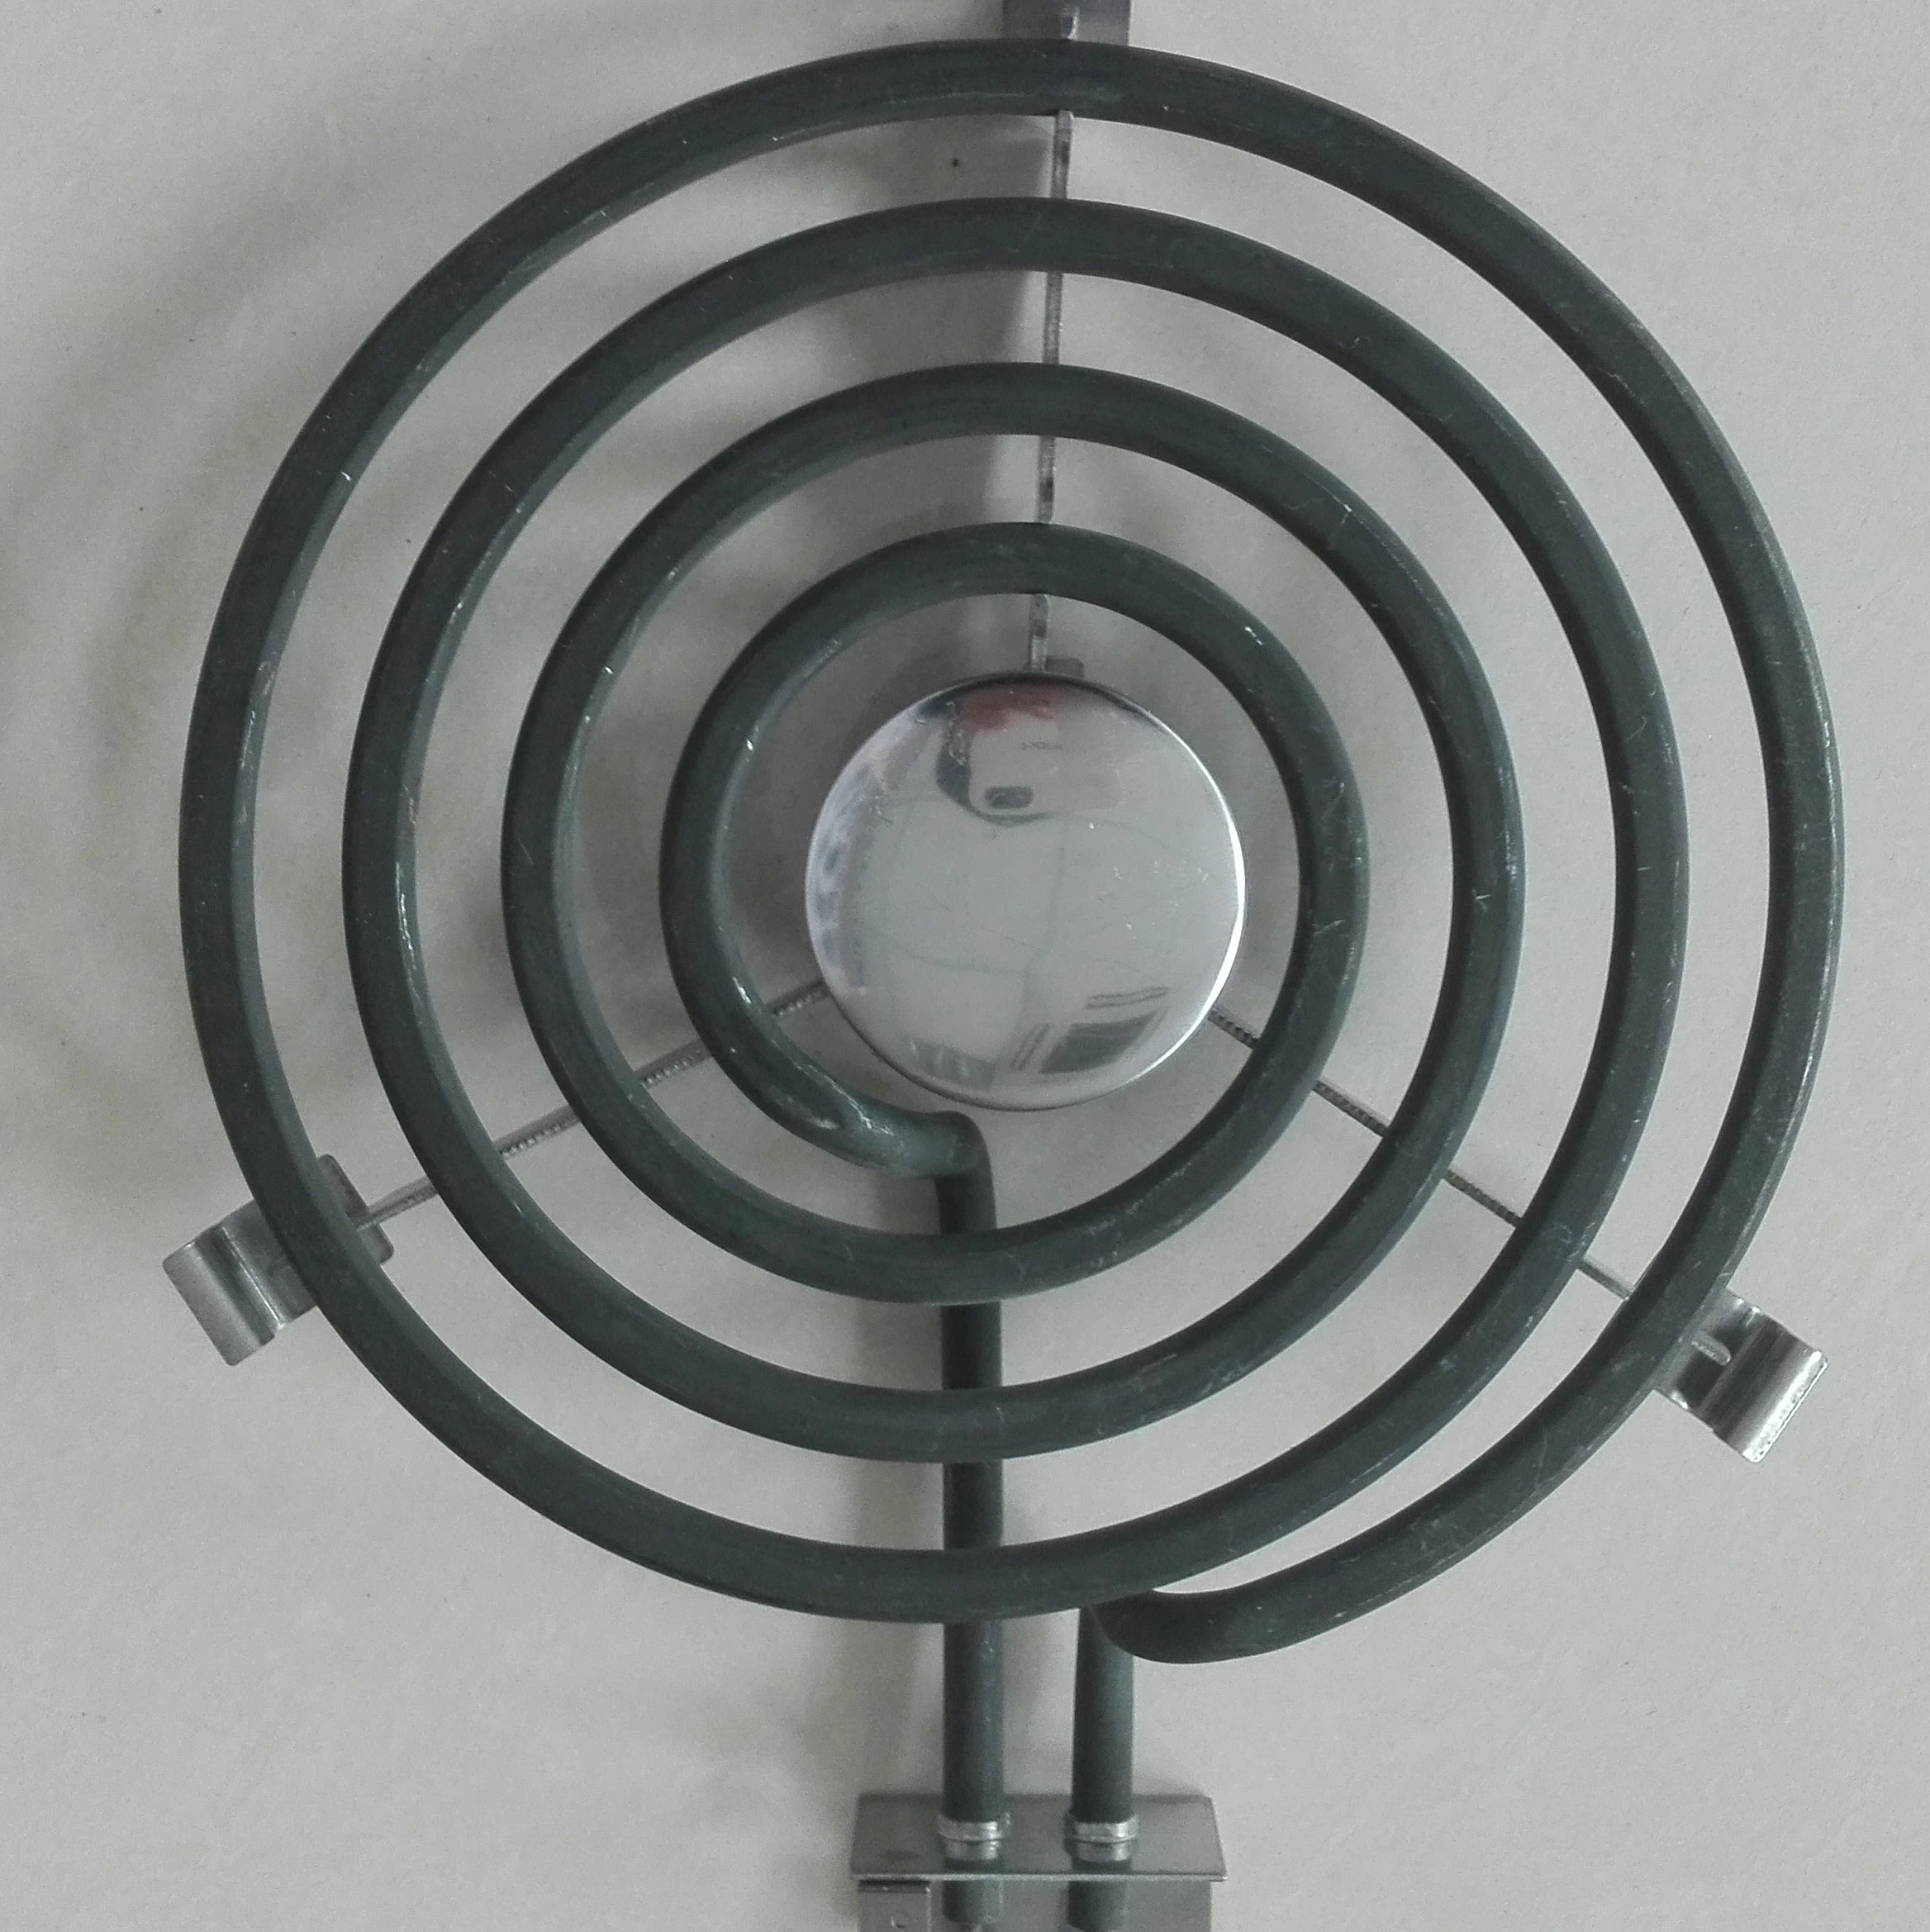 Whirlpool stove surface burner heating elements